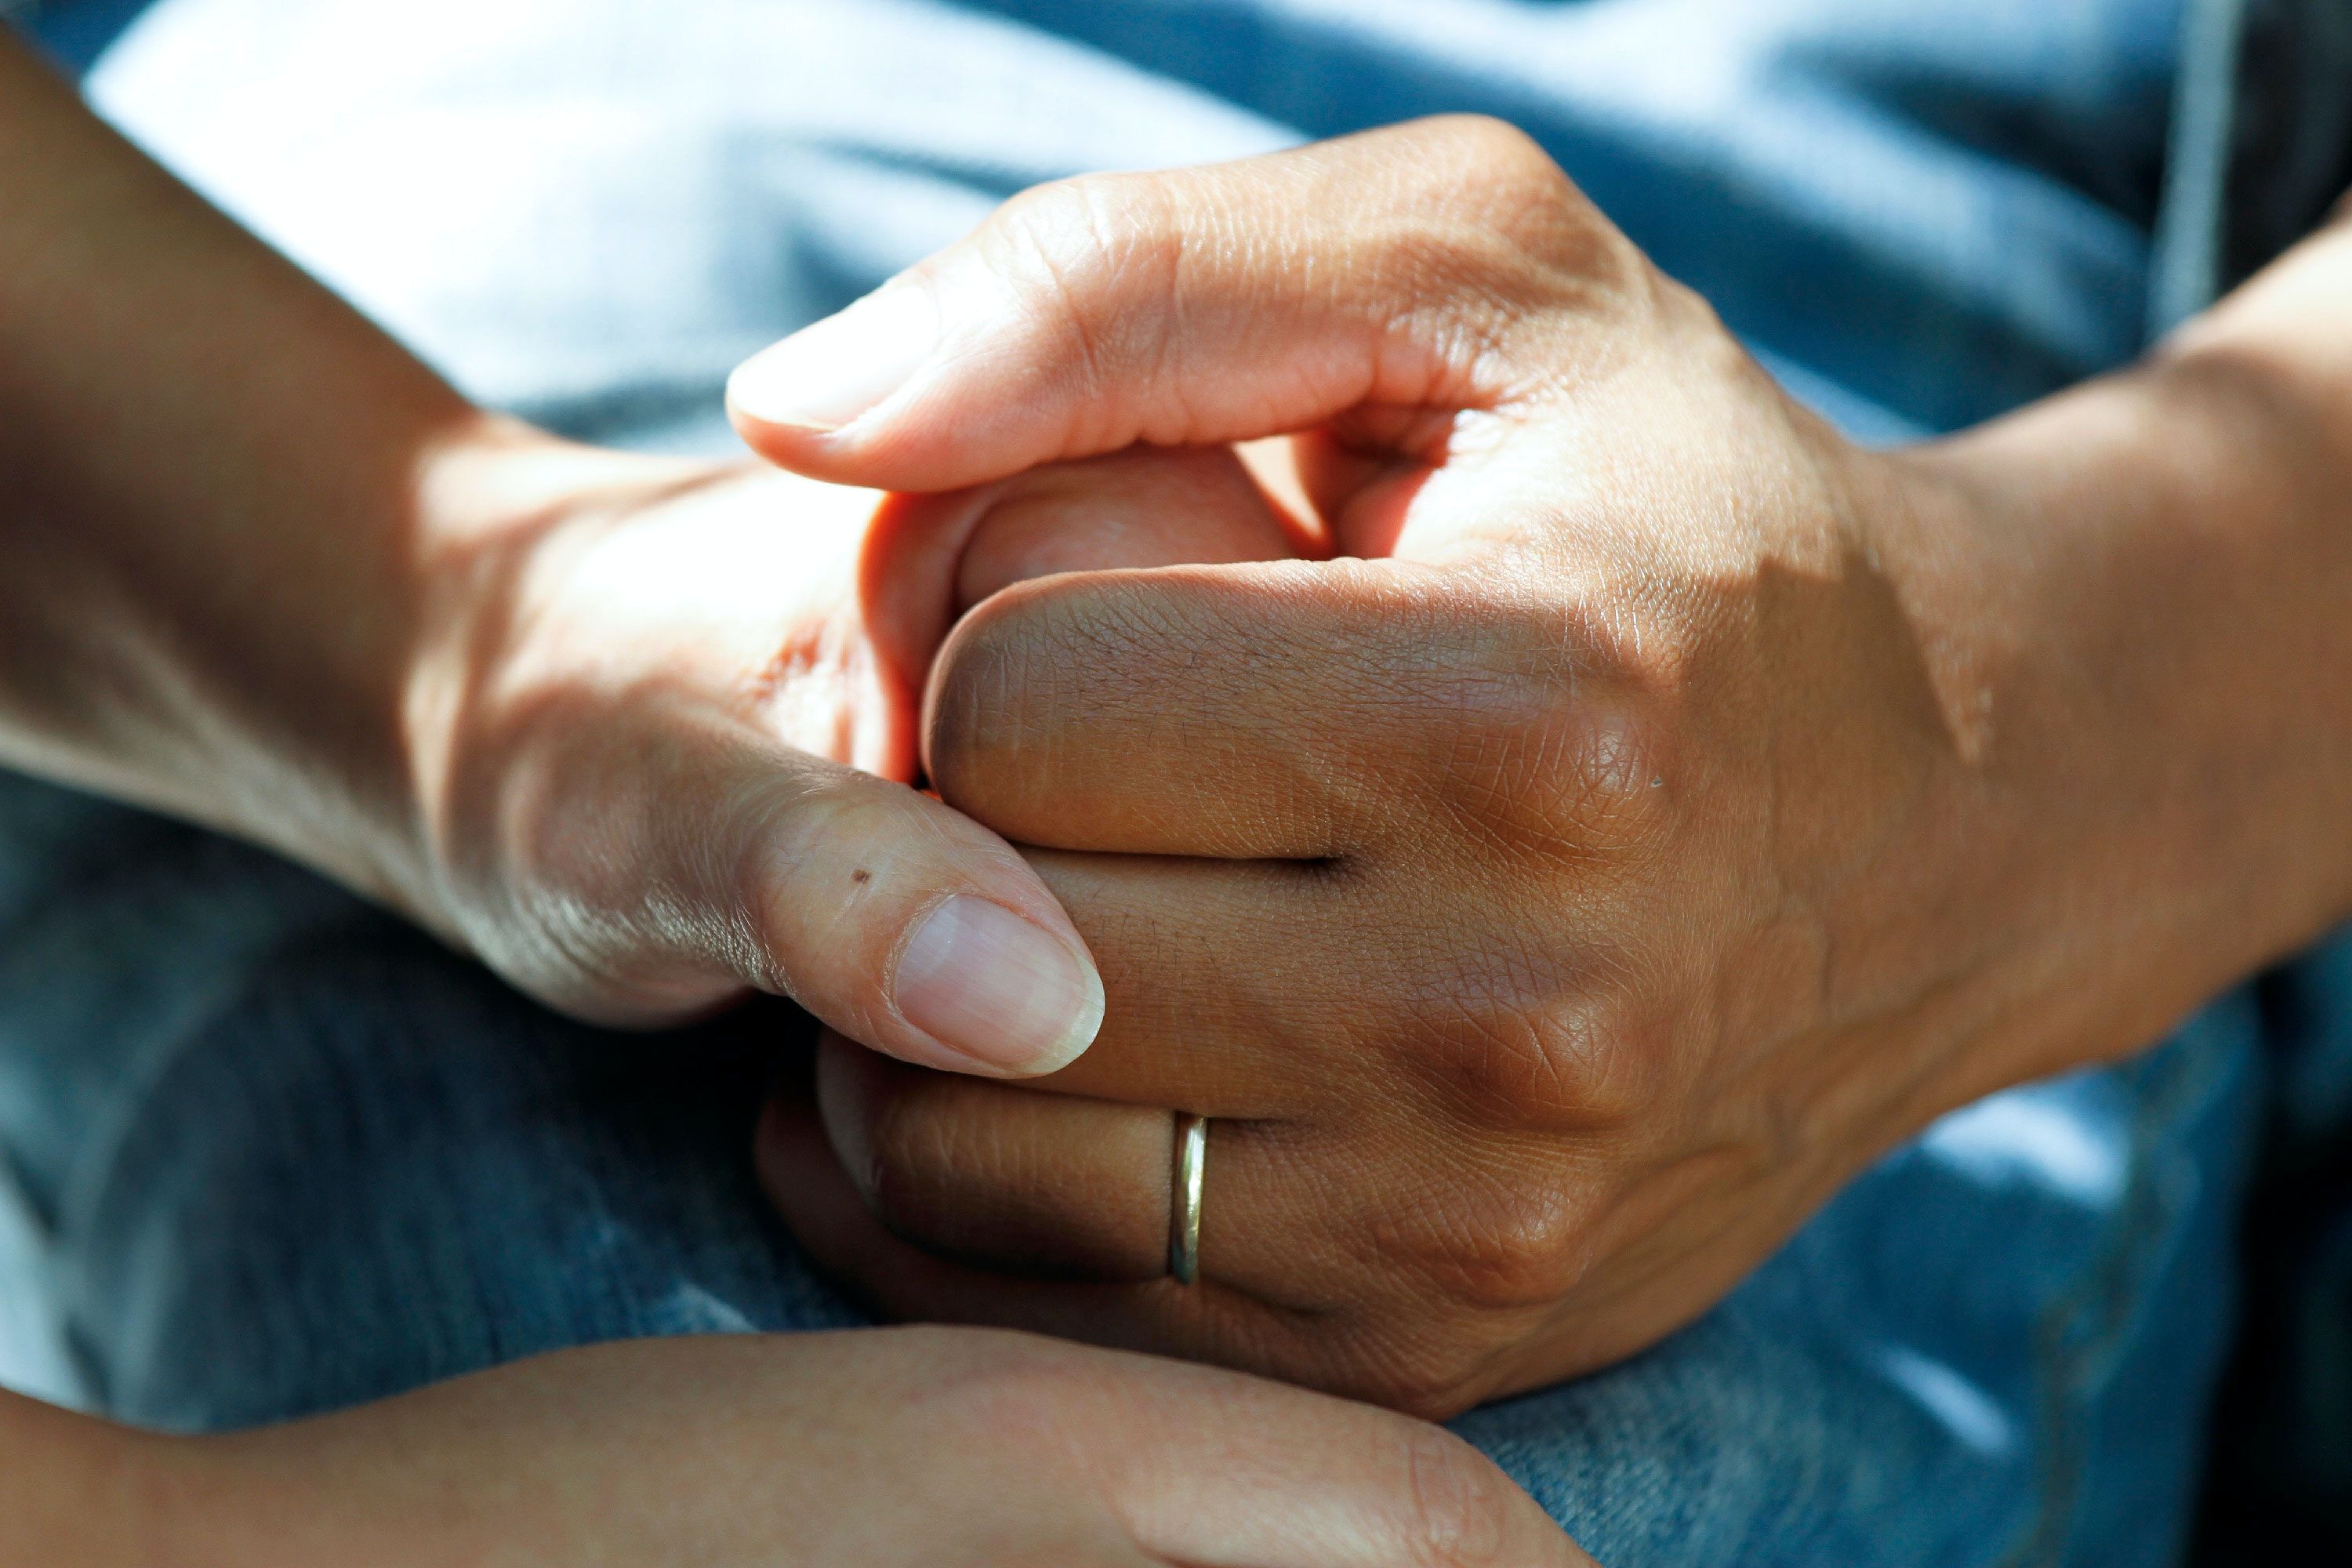 A hand with a wedding ring on its holds the hand of another person in a supportive and comforting gesture